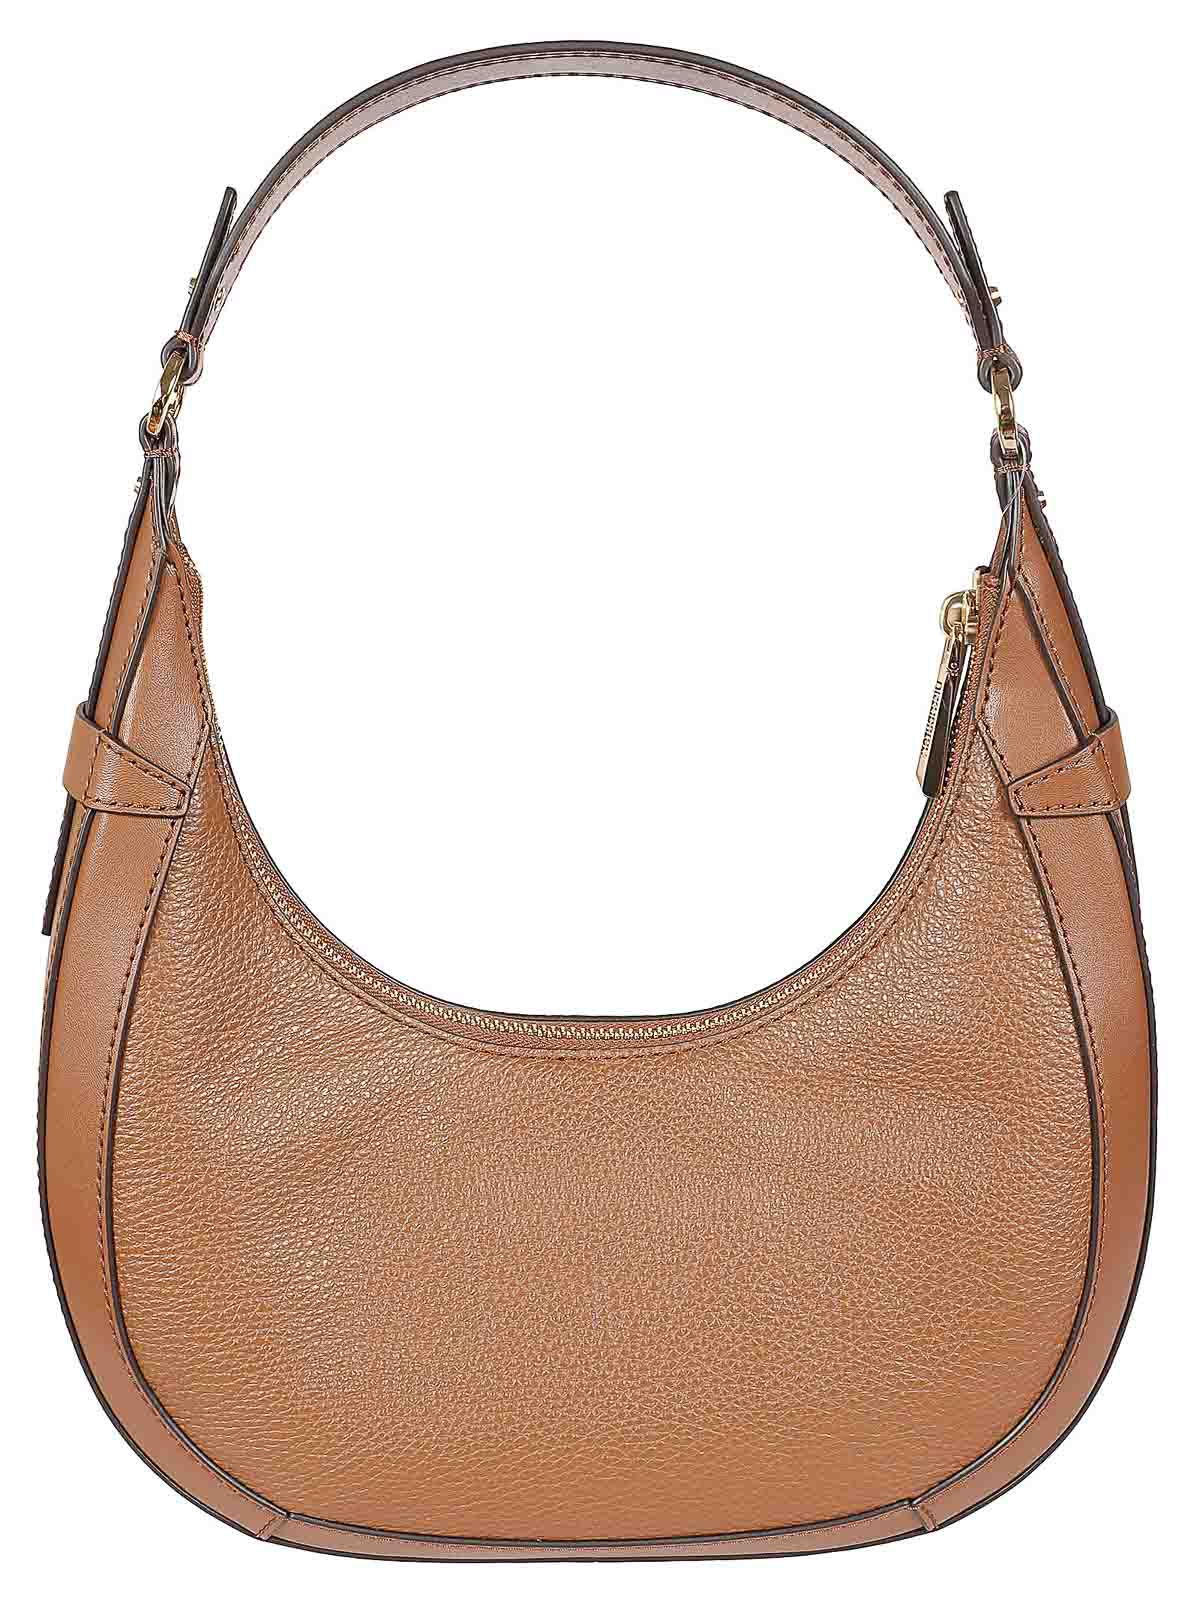 Shop Michael Kors Smooth Textured Leather Bag In Light Brown